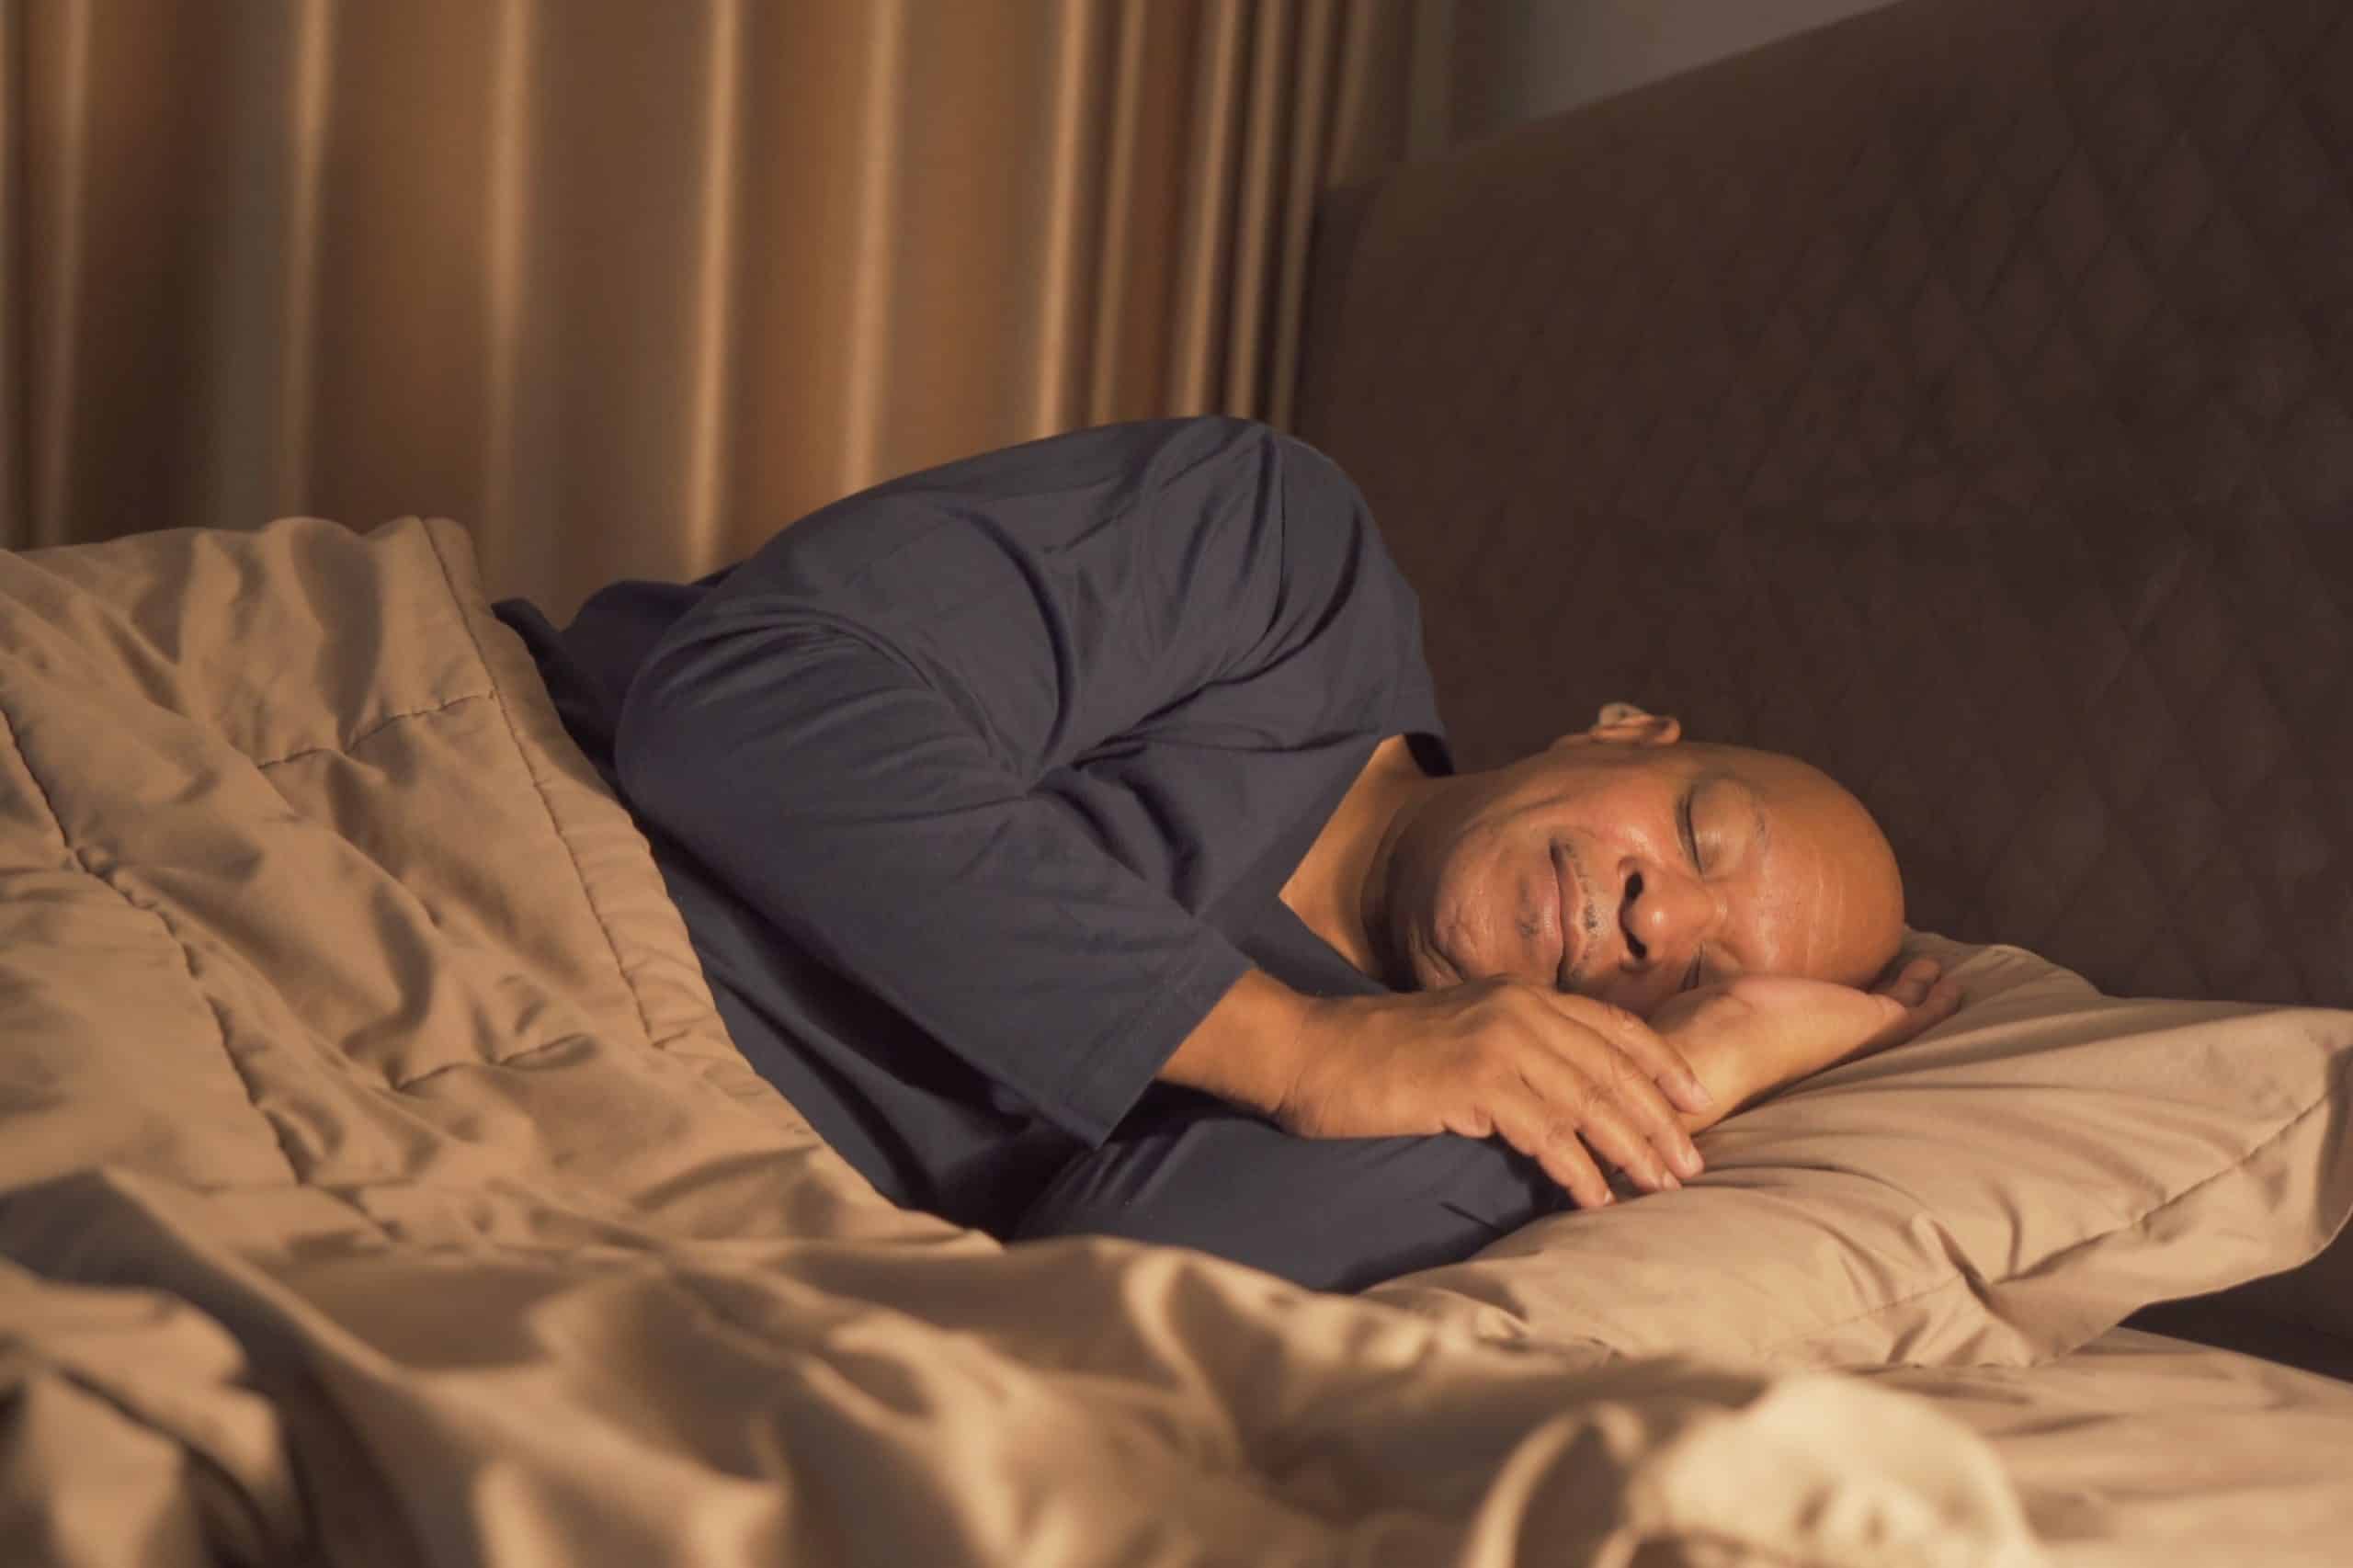 Male in pajamas sleeping restfully on his side in bed.